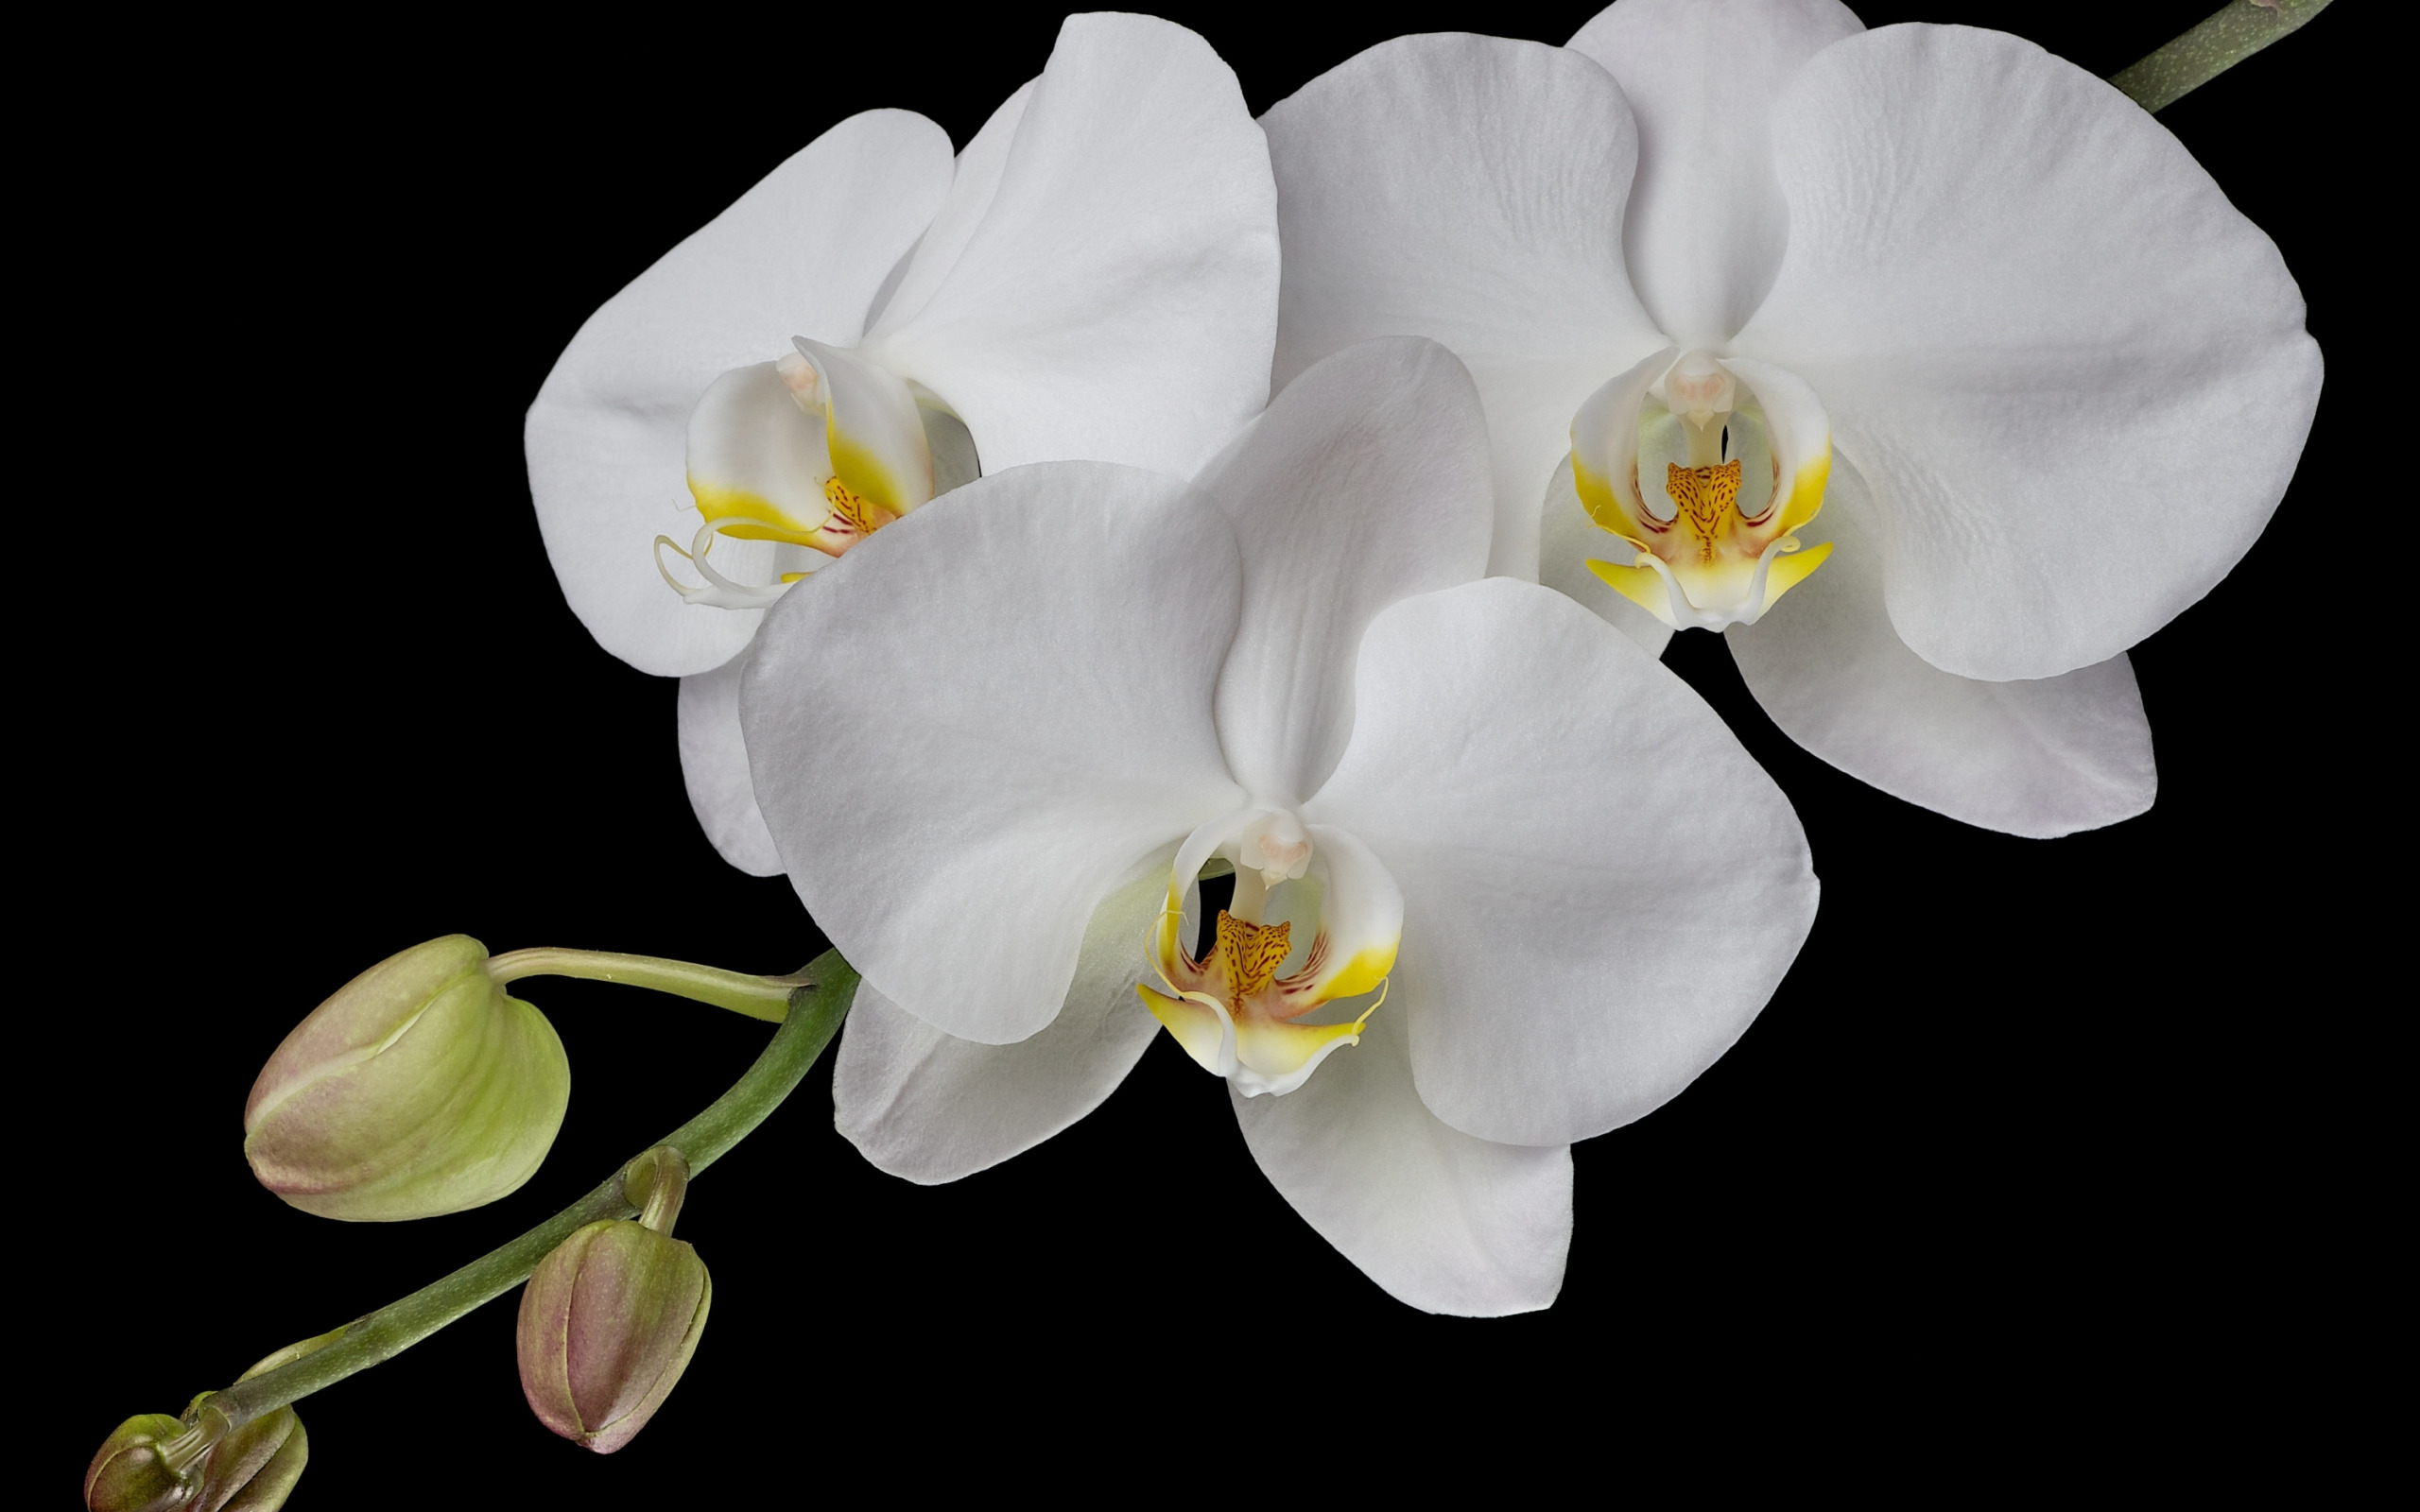 Download wallpaper white, branch, Orchid, section flowers in resolution 256...